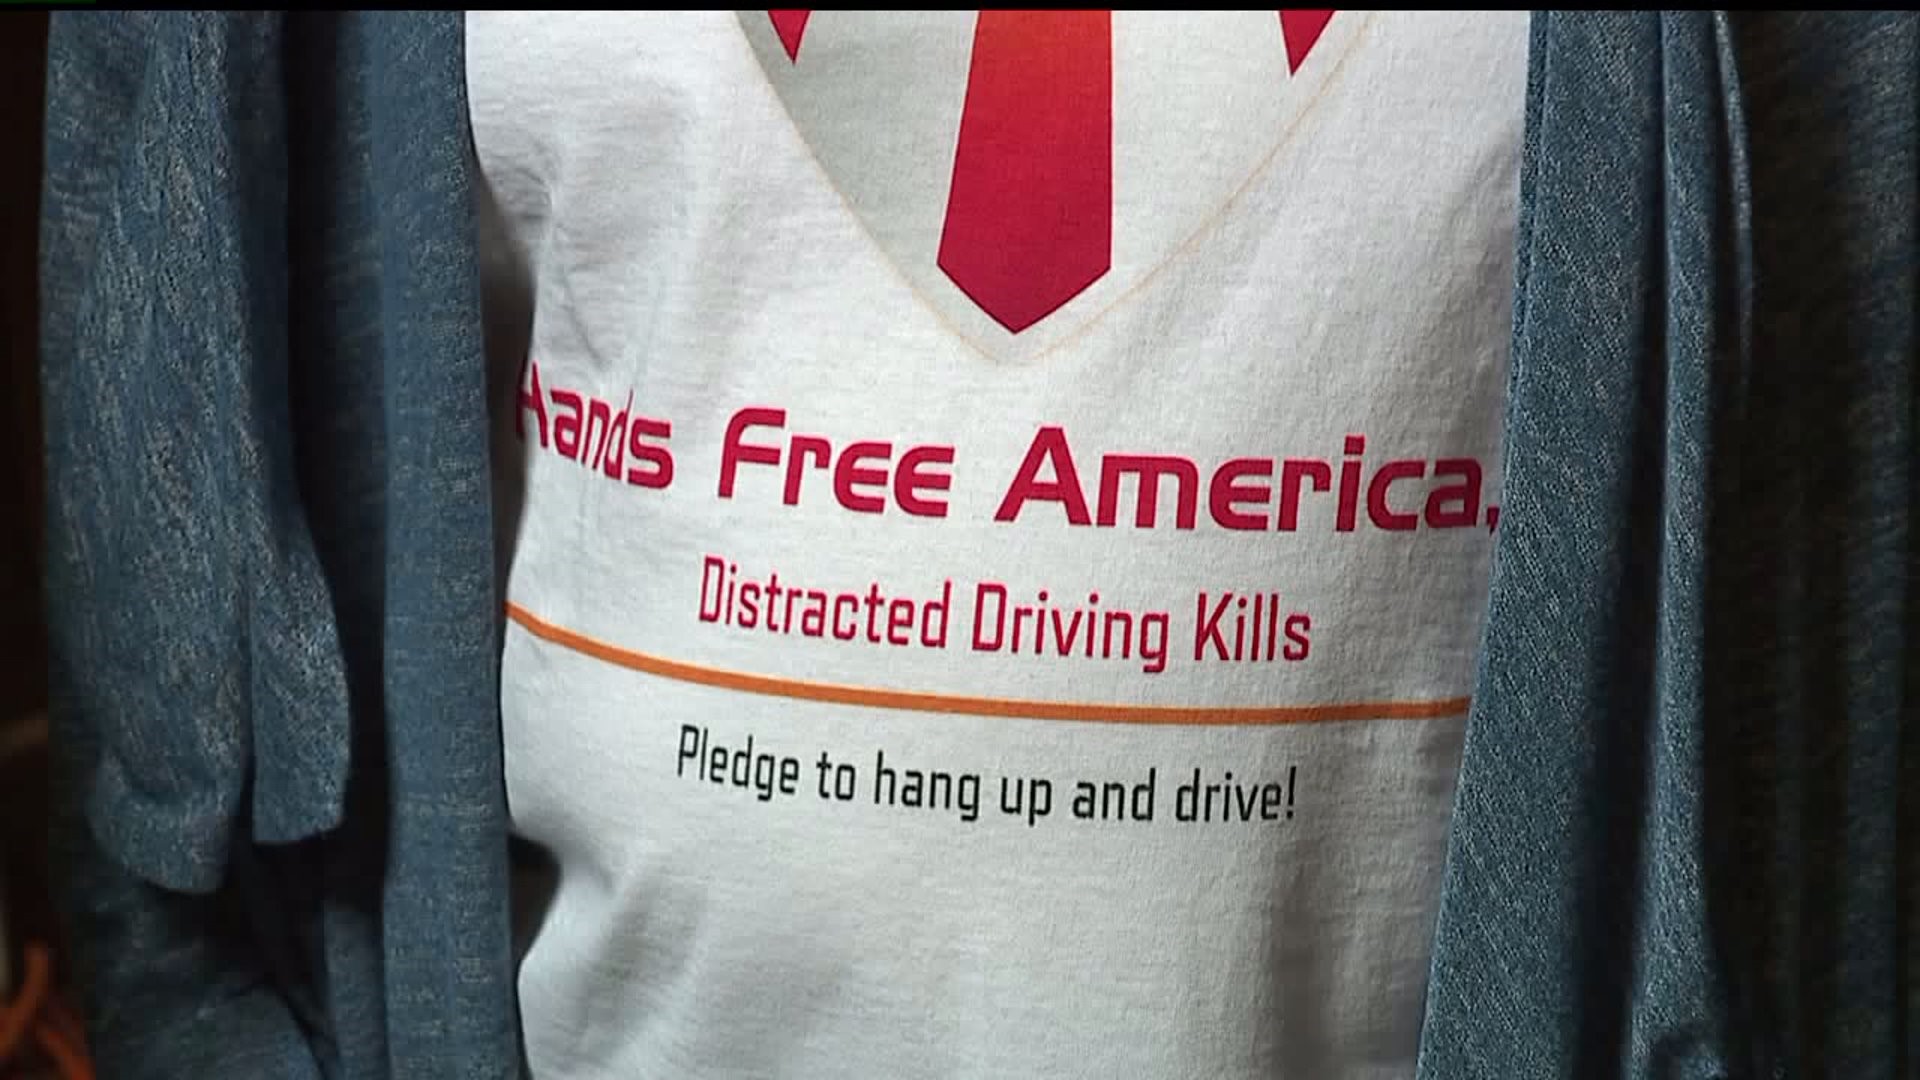 Hands Free America fundraiser for distracted driver awareness